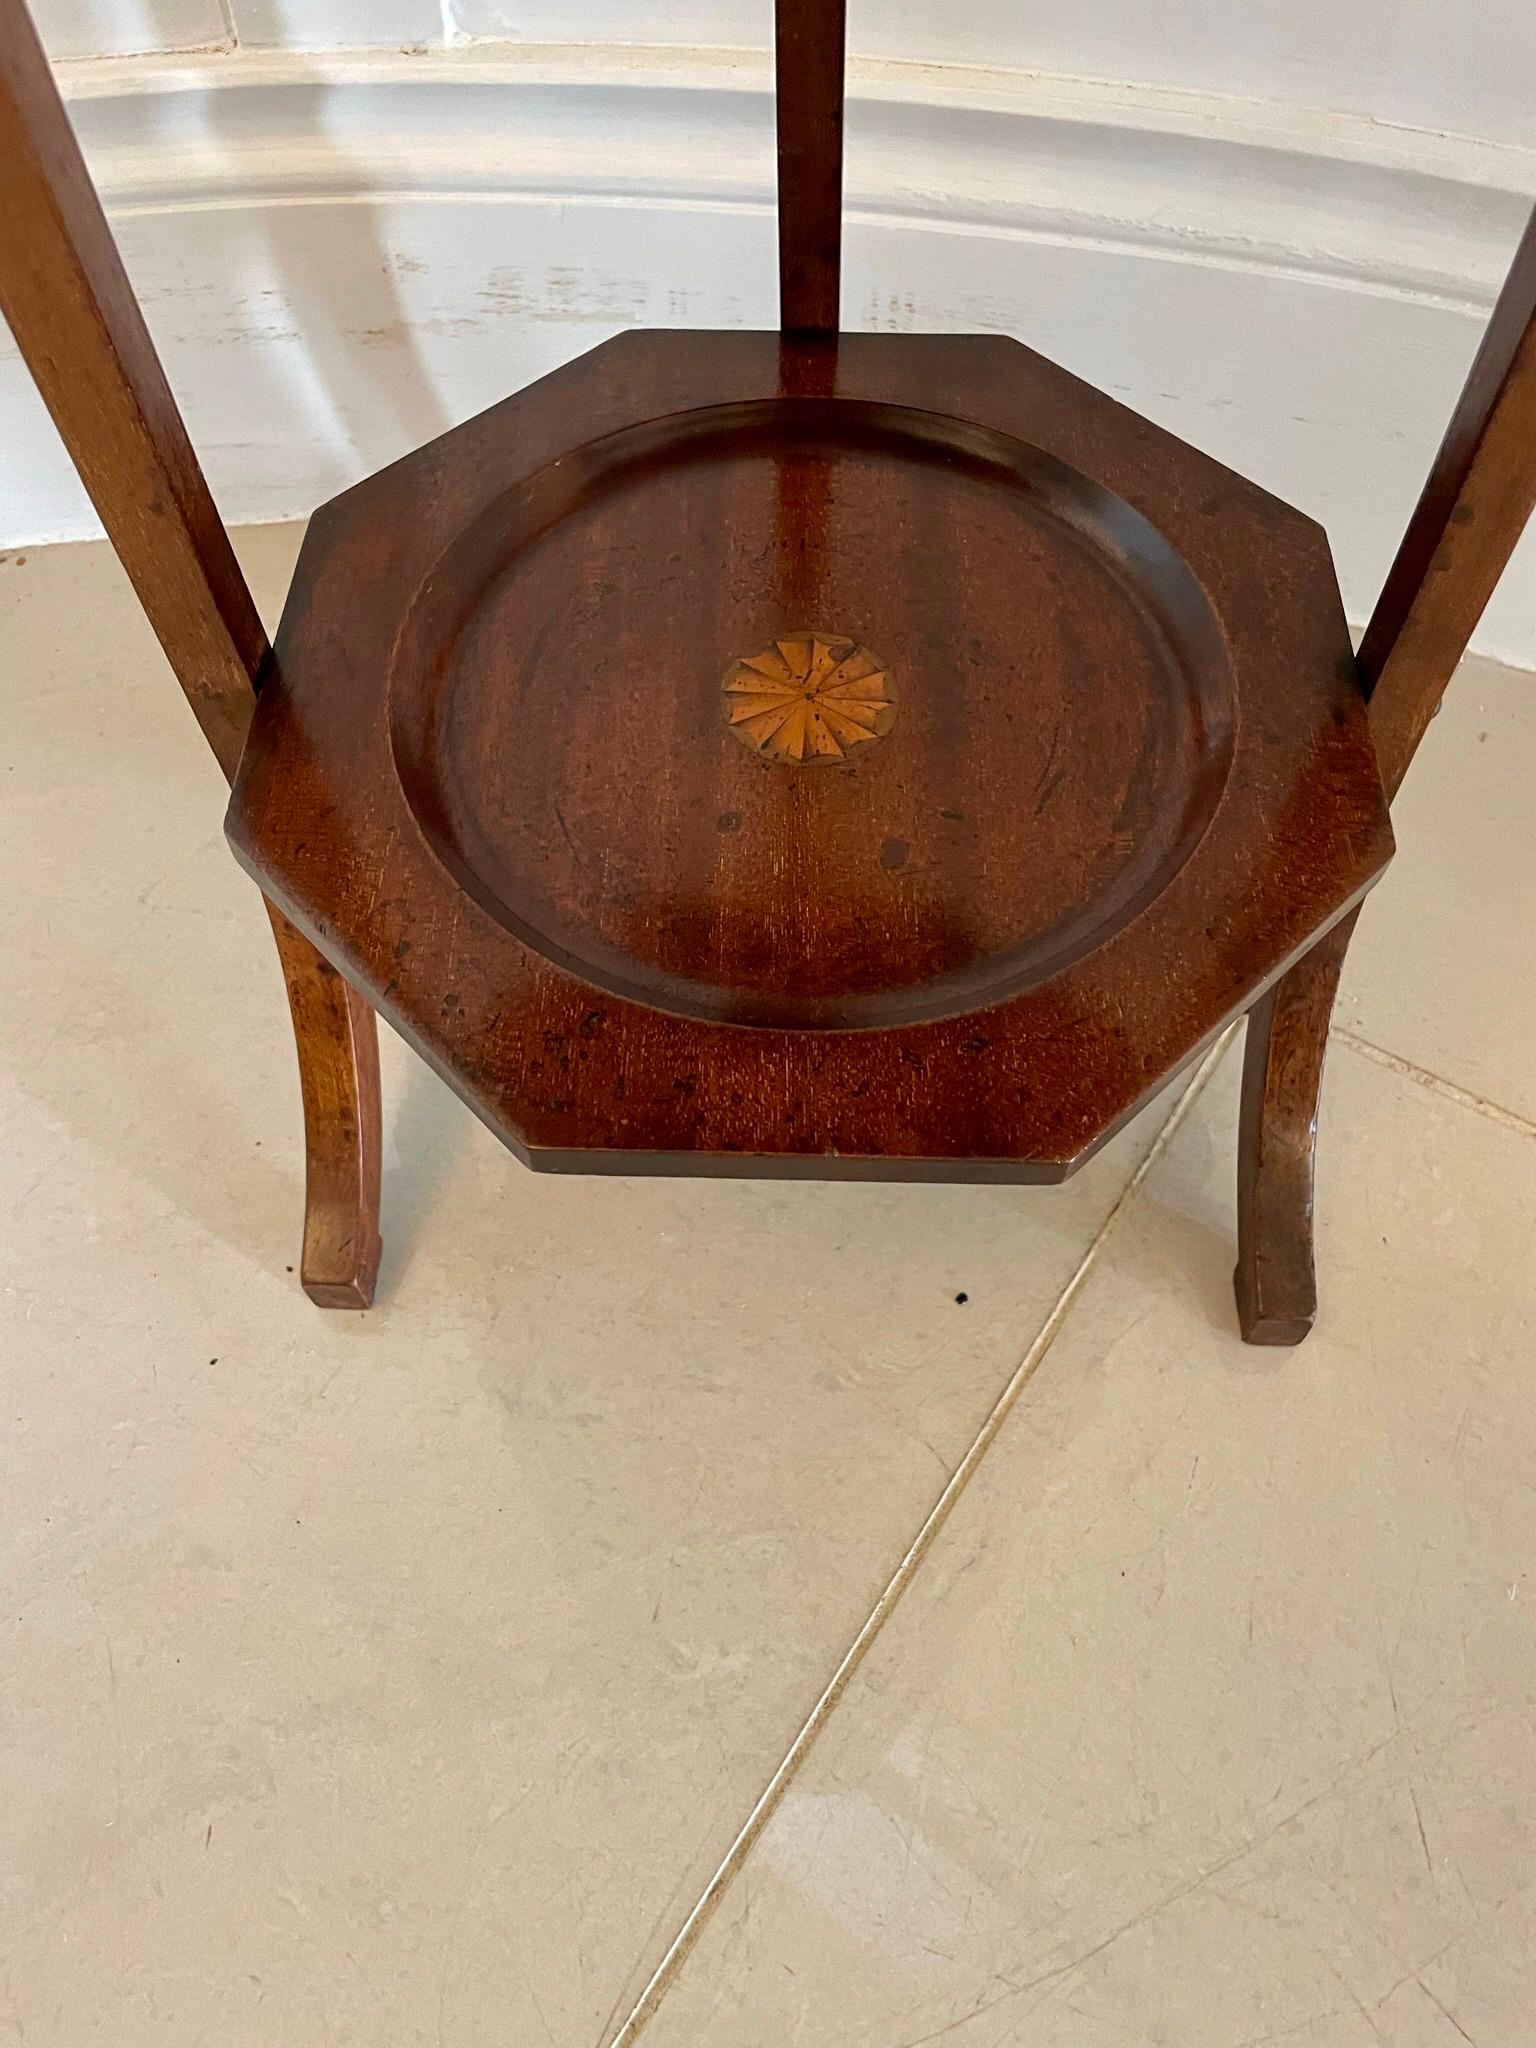 20th Century Antique Edwardian Inlaid Mahogany 3 Tier Cake Stand For Sale